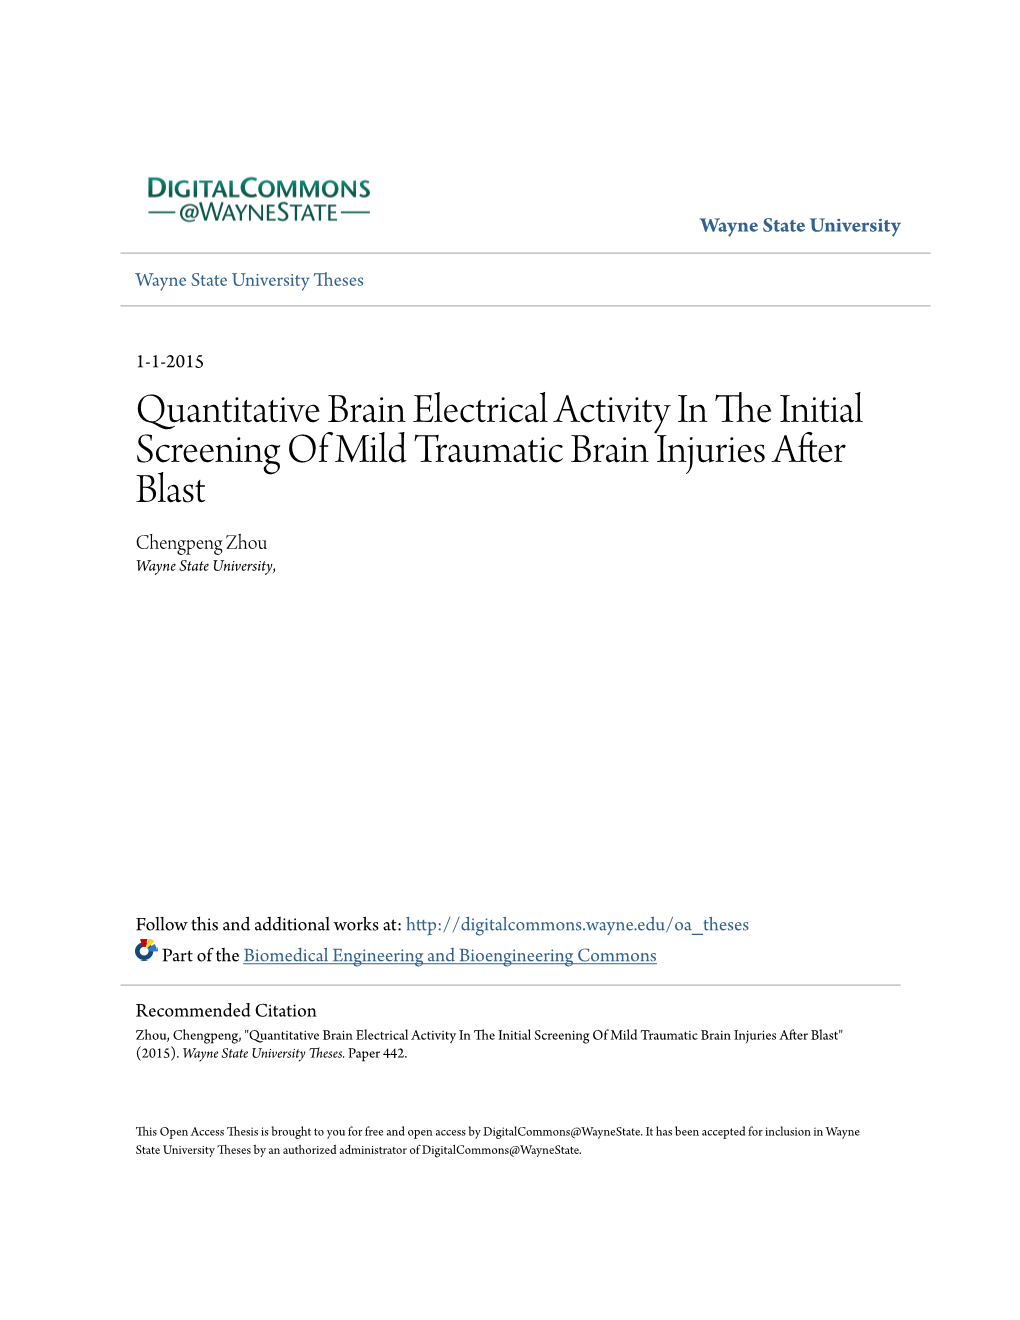 QUANTITATIVE BRAIN ELECTRICAL ACTIVITY in the INITIAL SCREENING of MILD TRAUMATIC BRAIN INJURIES AFTER BLAST By